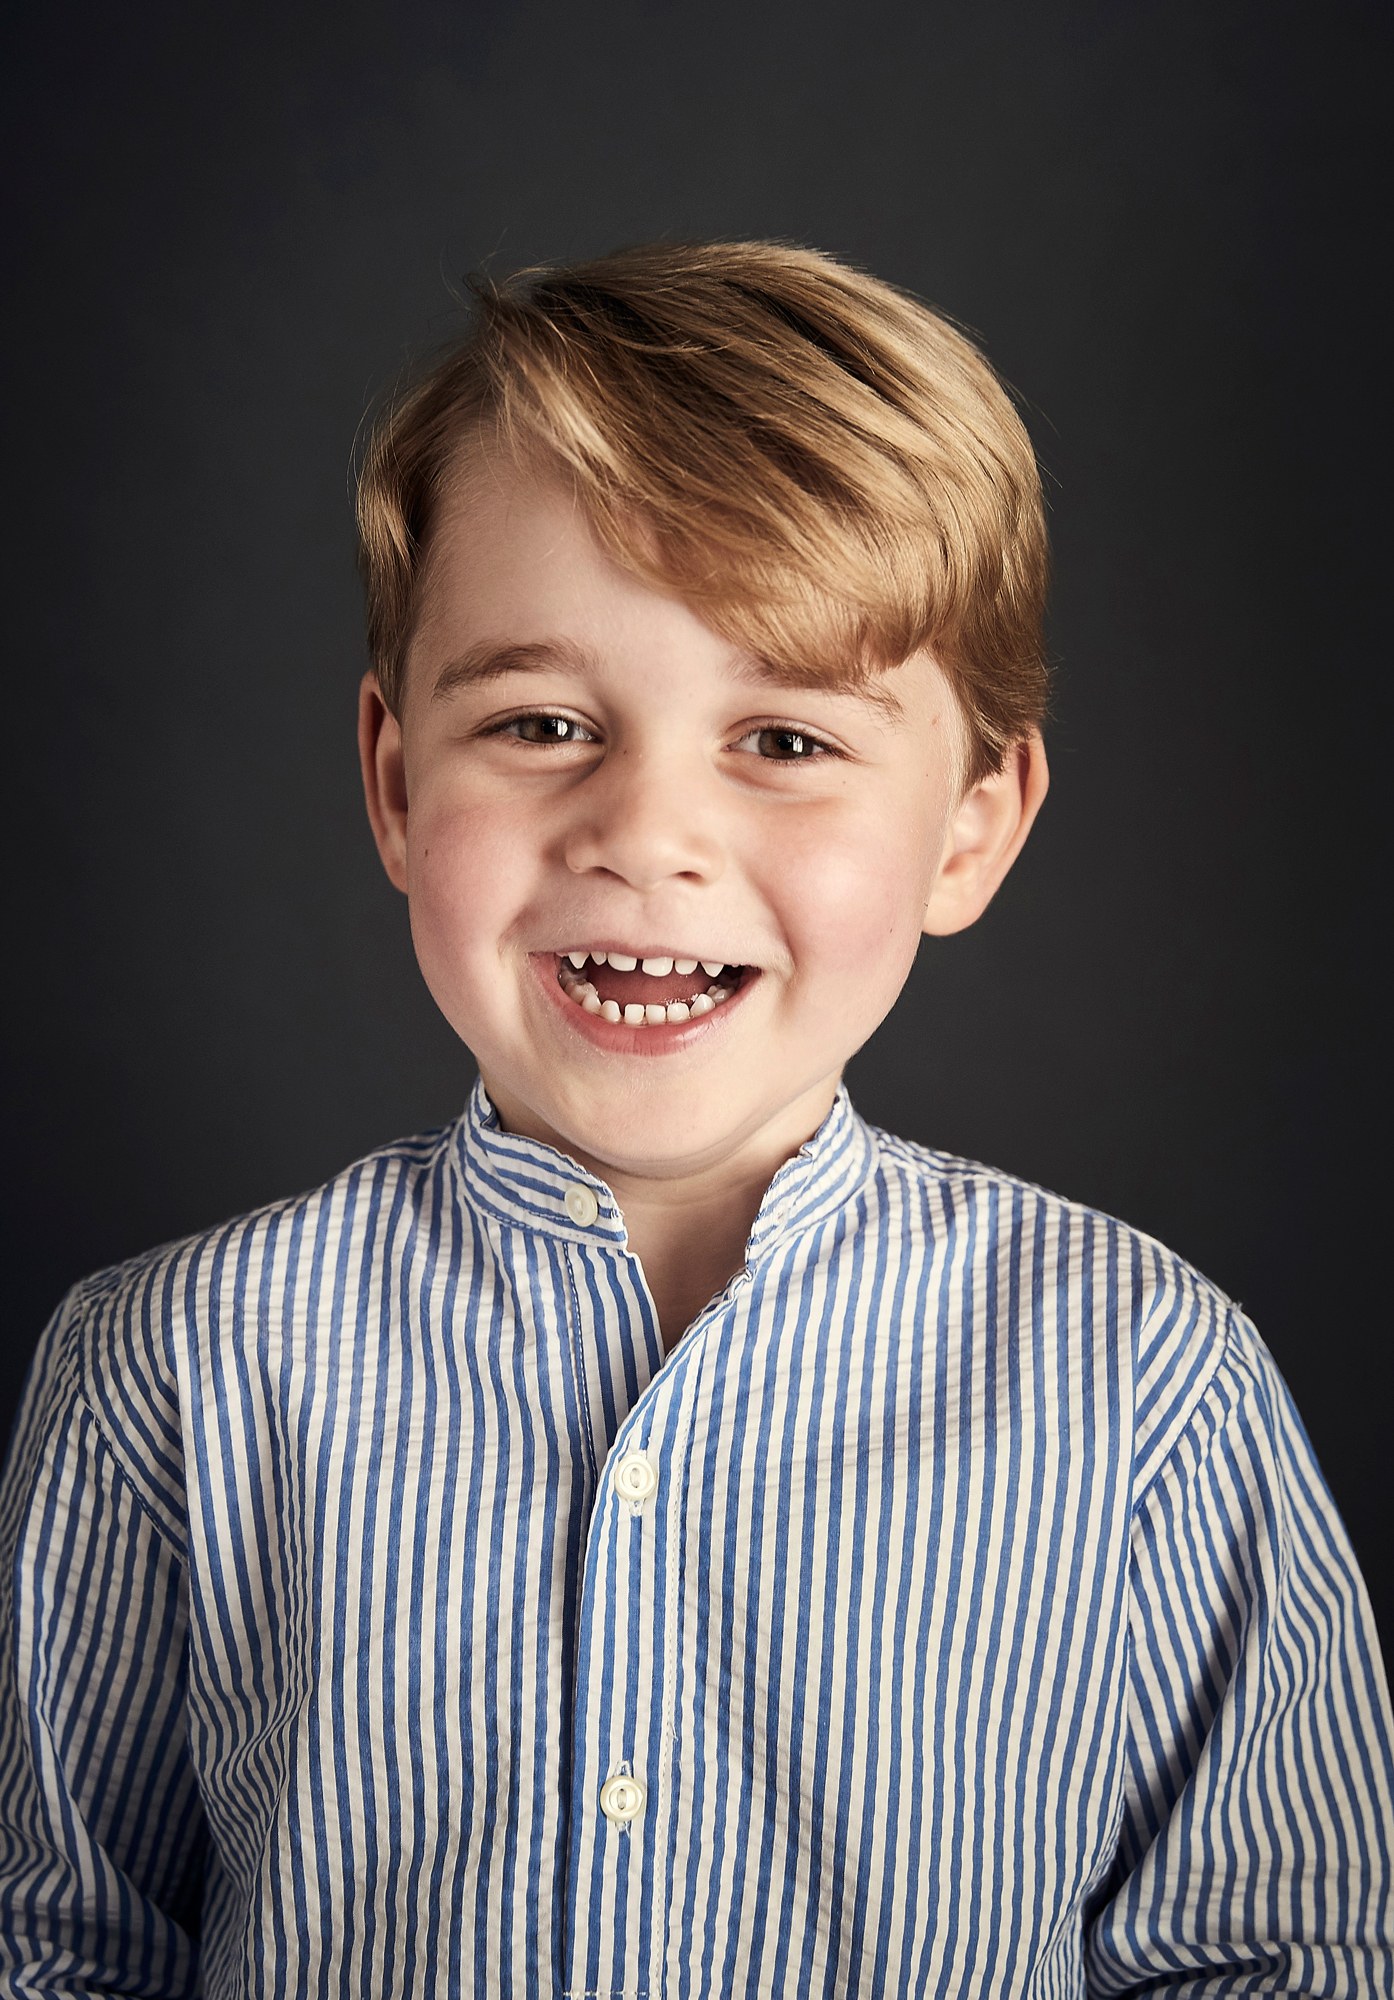 Prince George's Official Birthday Portrait Has Been Released - Vogue